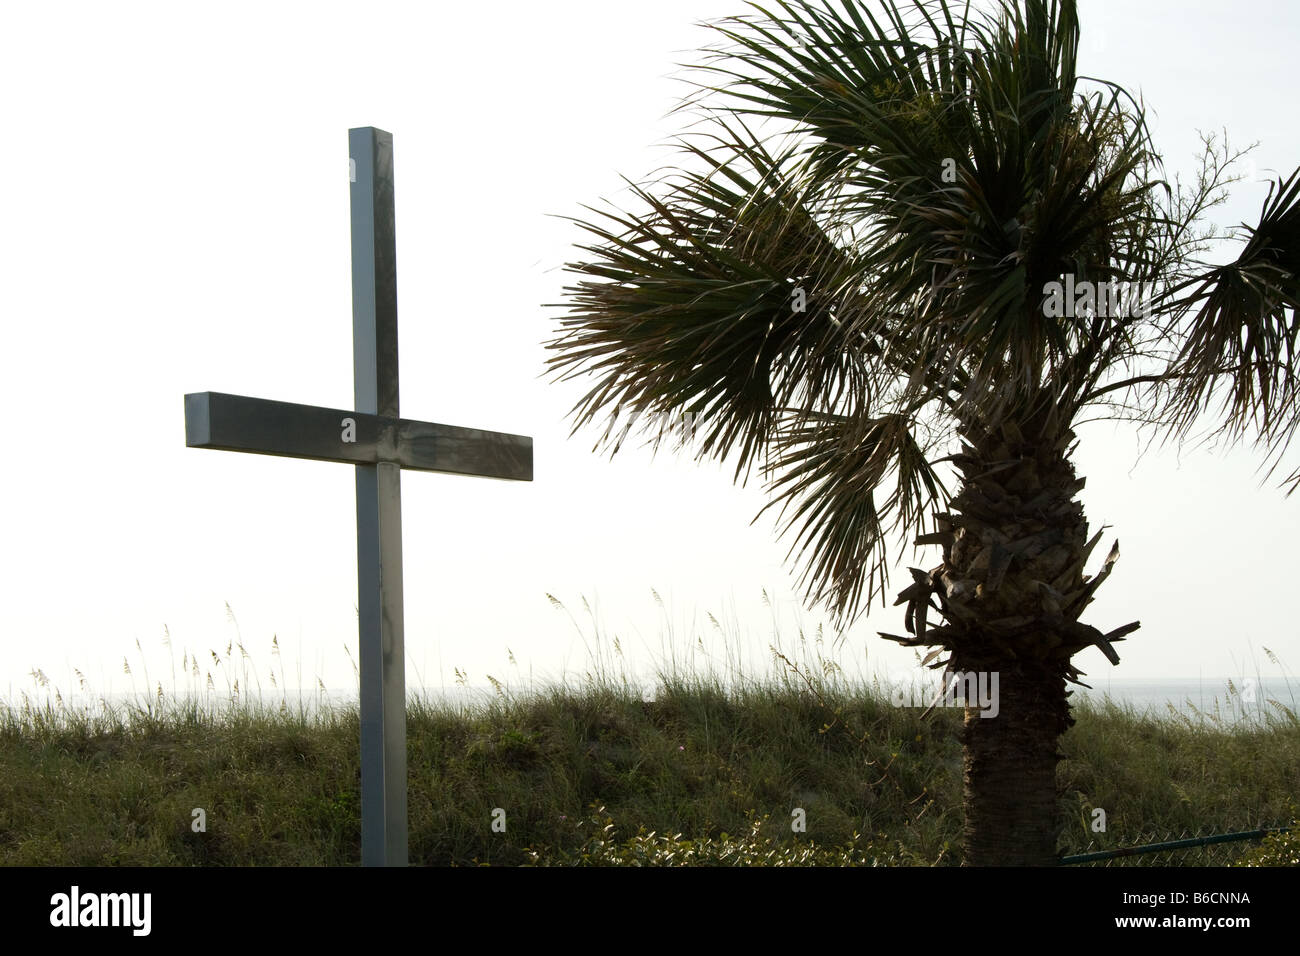 Christian cross by a palm tree in Jacksonville Florida Stock Photo